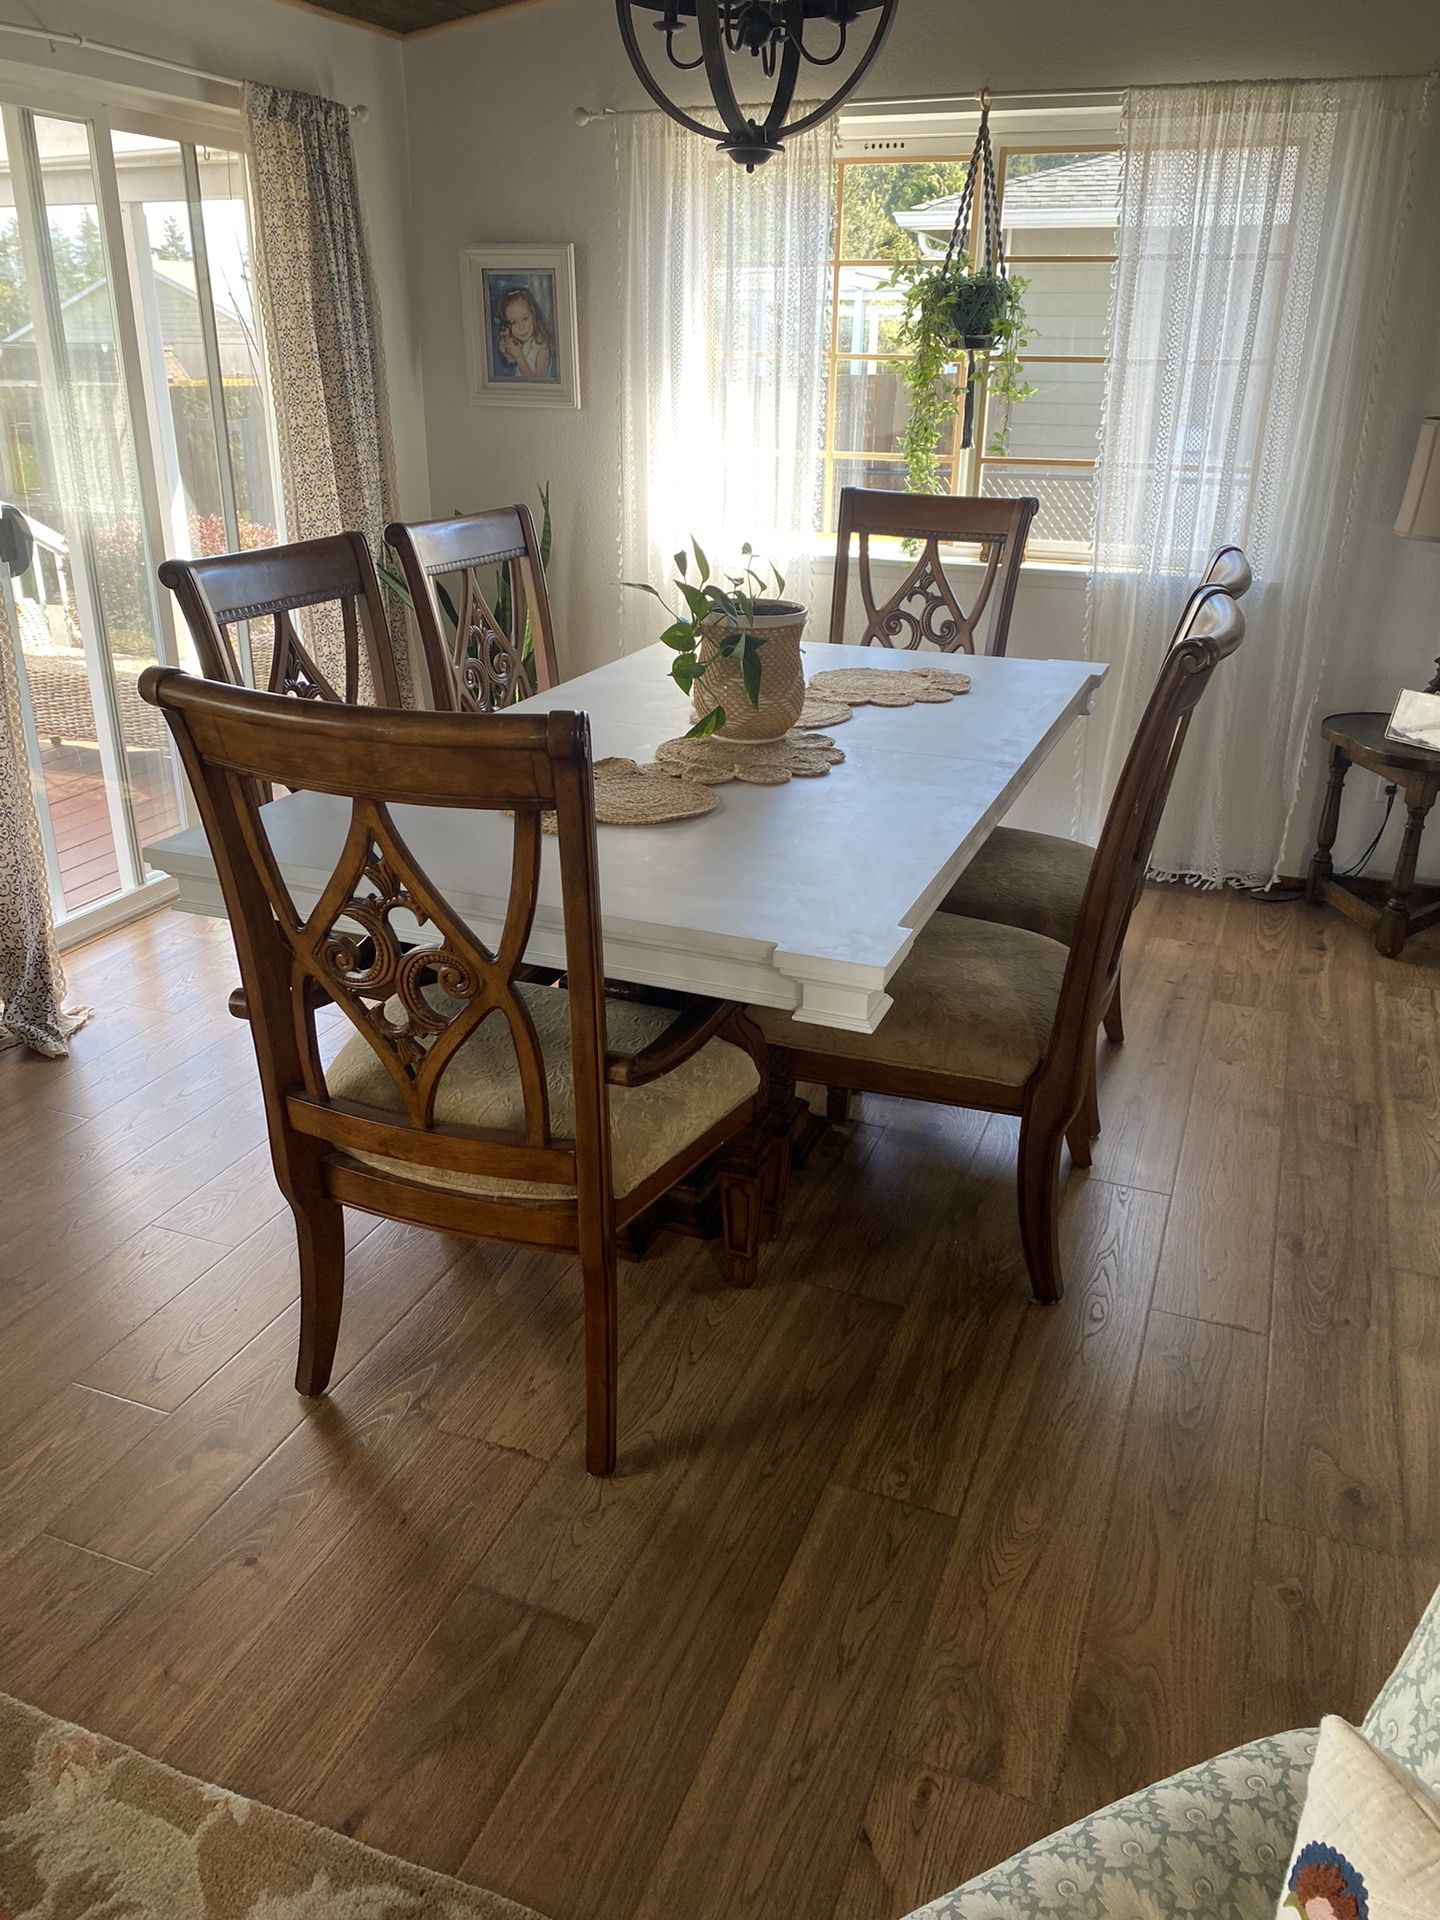 Beautiful Mid Cent Dining Table And Chairs, Very Big And Heavy. Super Comfortable And Chairs Are Huge